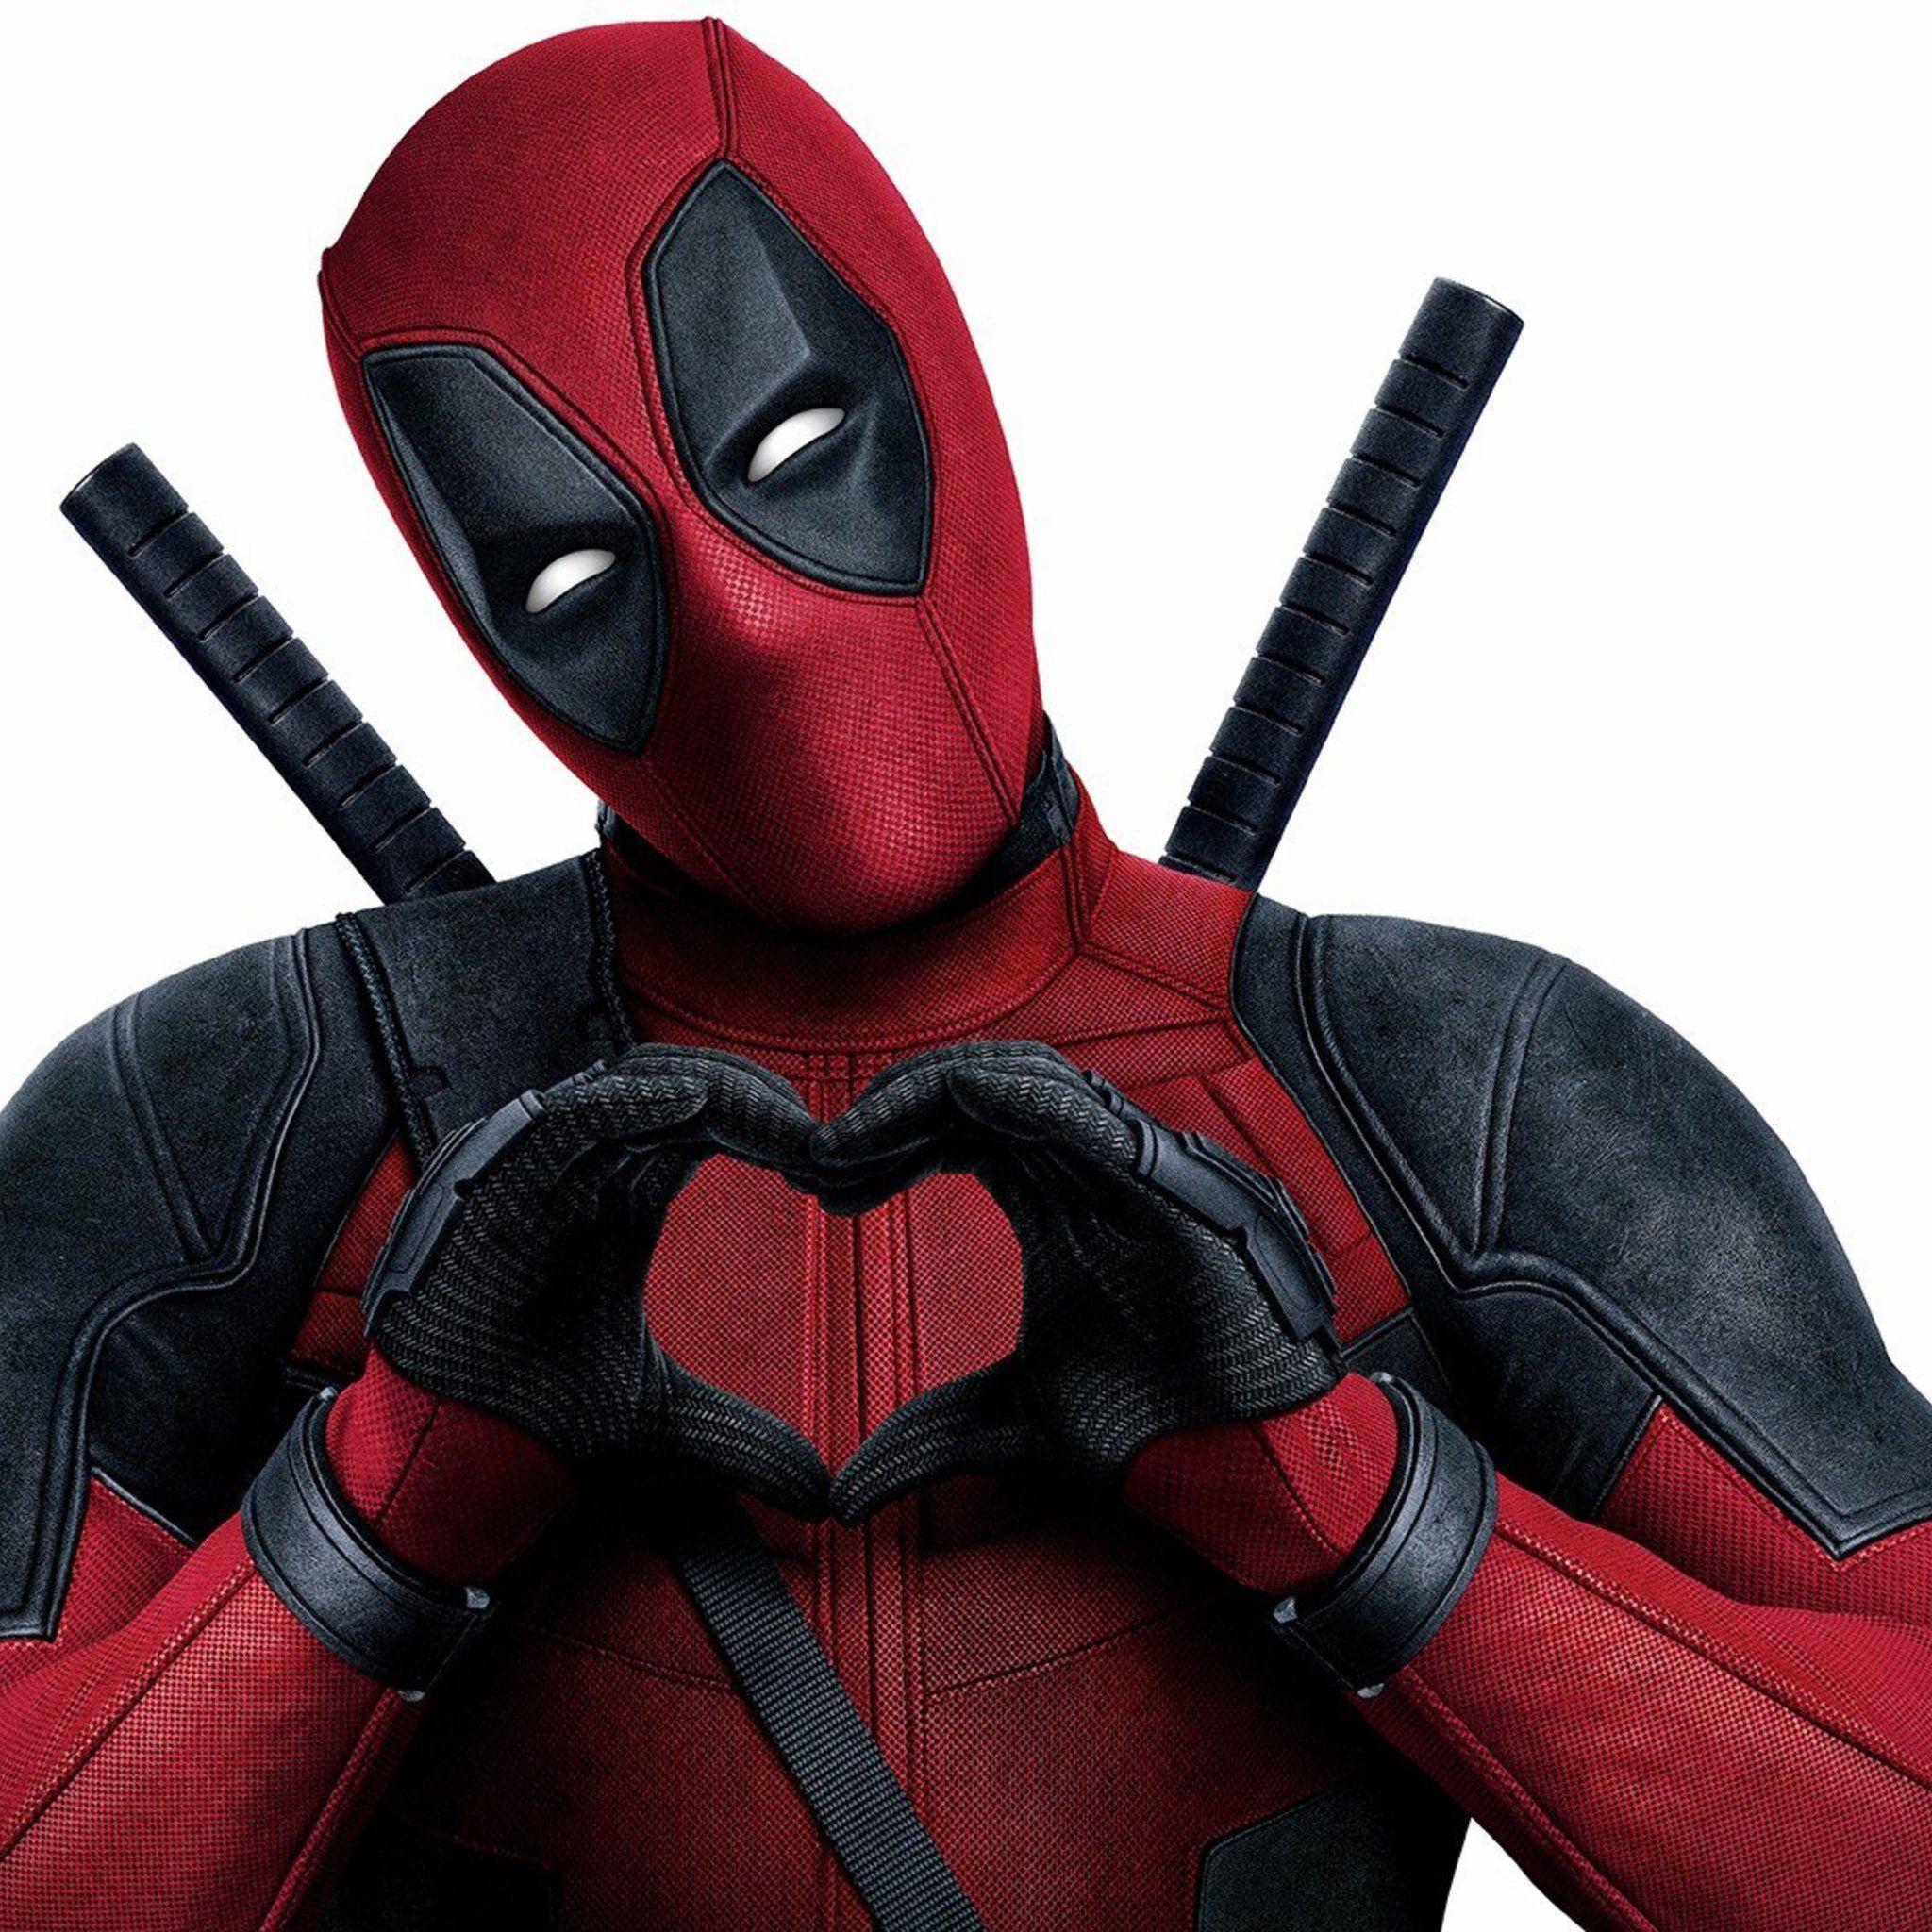 deadpool love 2048 x 2048 Wallpaper available for free download